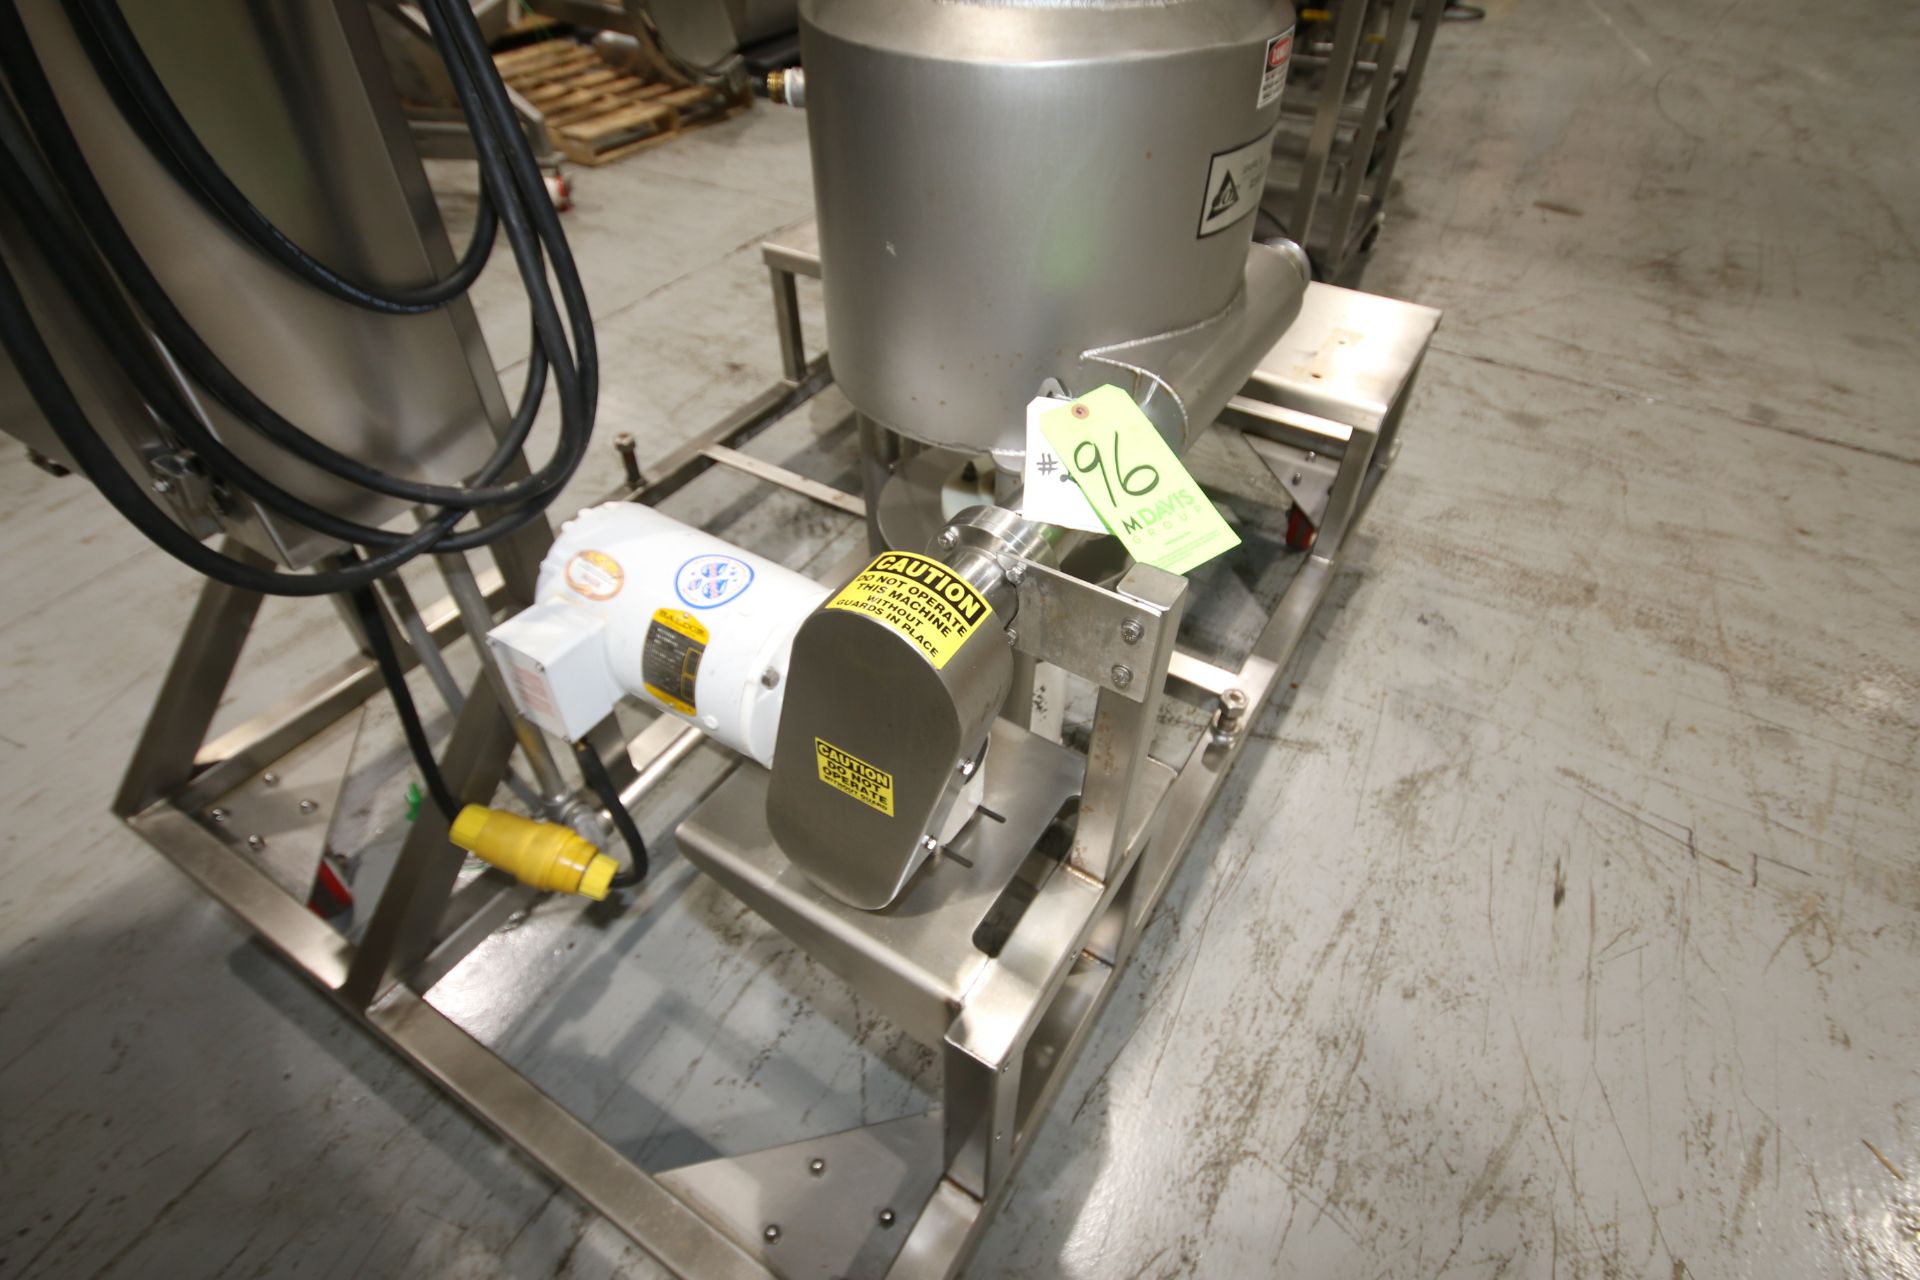 Skid-Mounted Blending System includes GOE Aprox. 13" W x 16" H Blender with Baldor 1 hp Motor, - Image 4 of 7